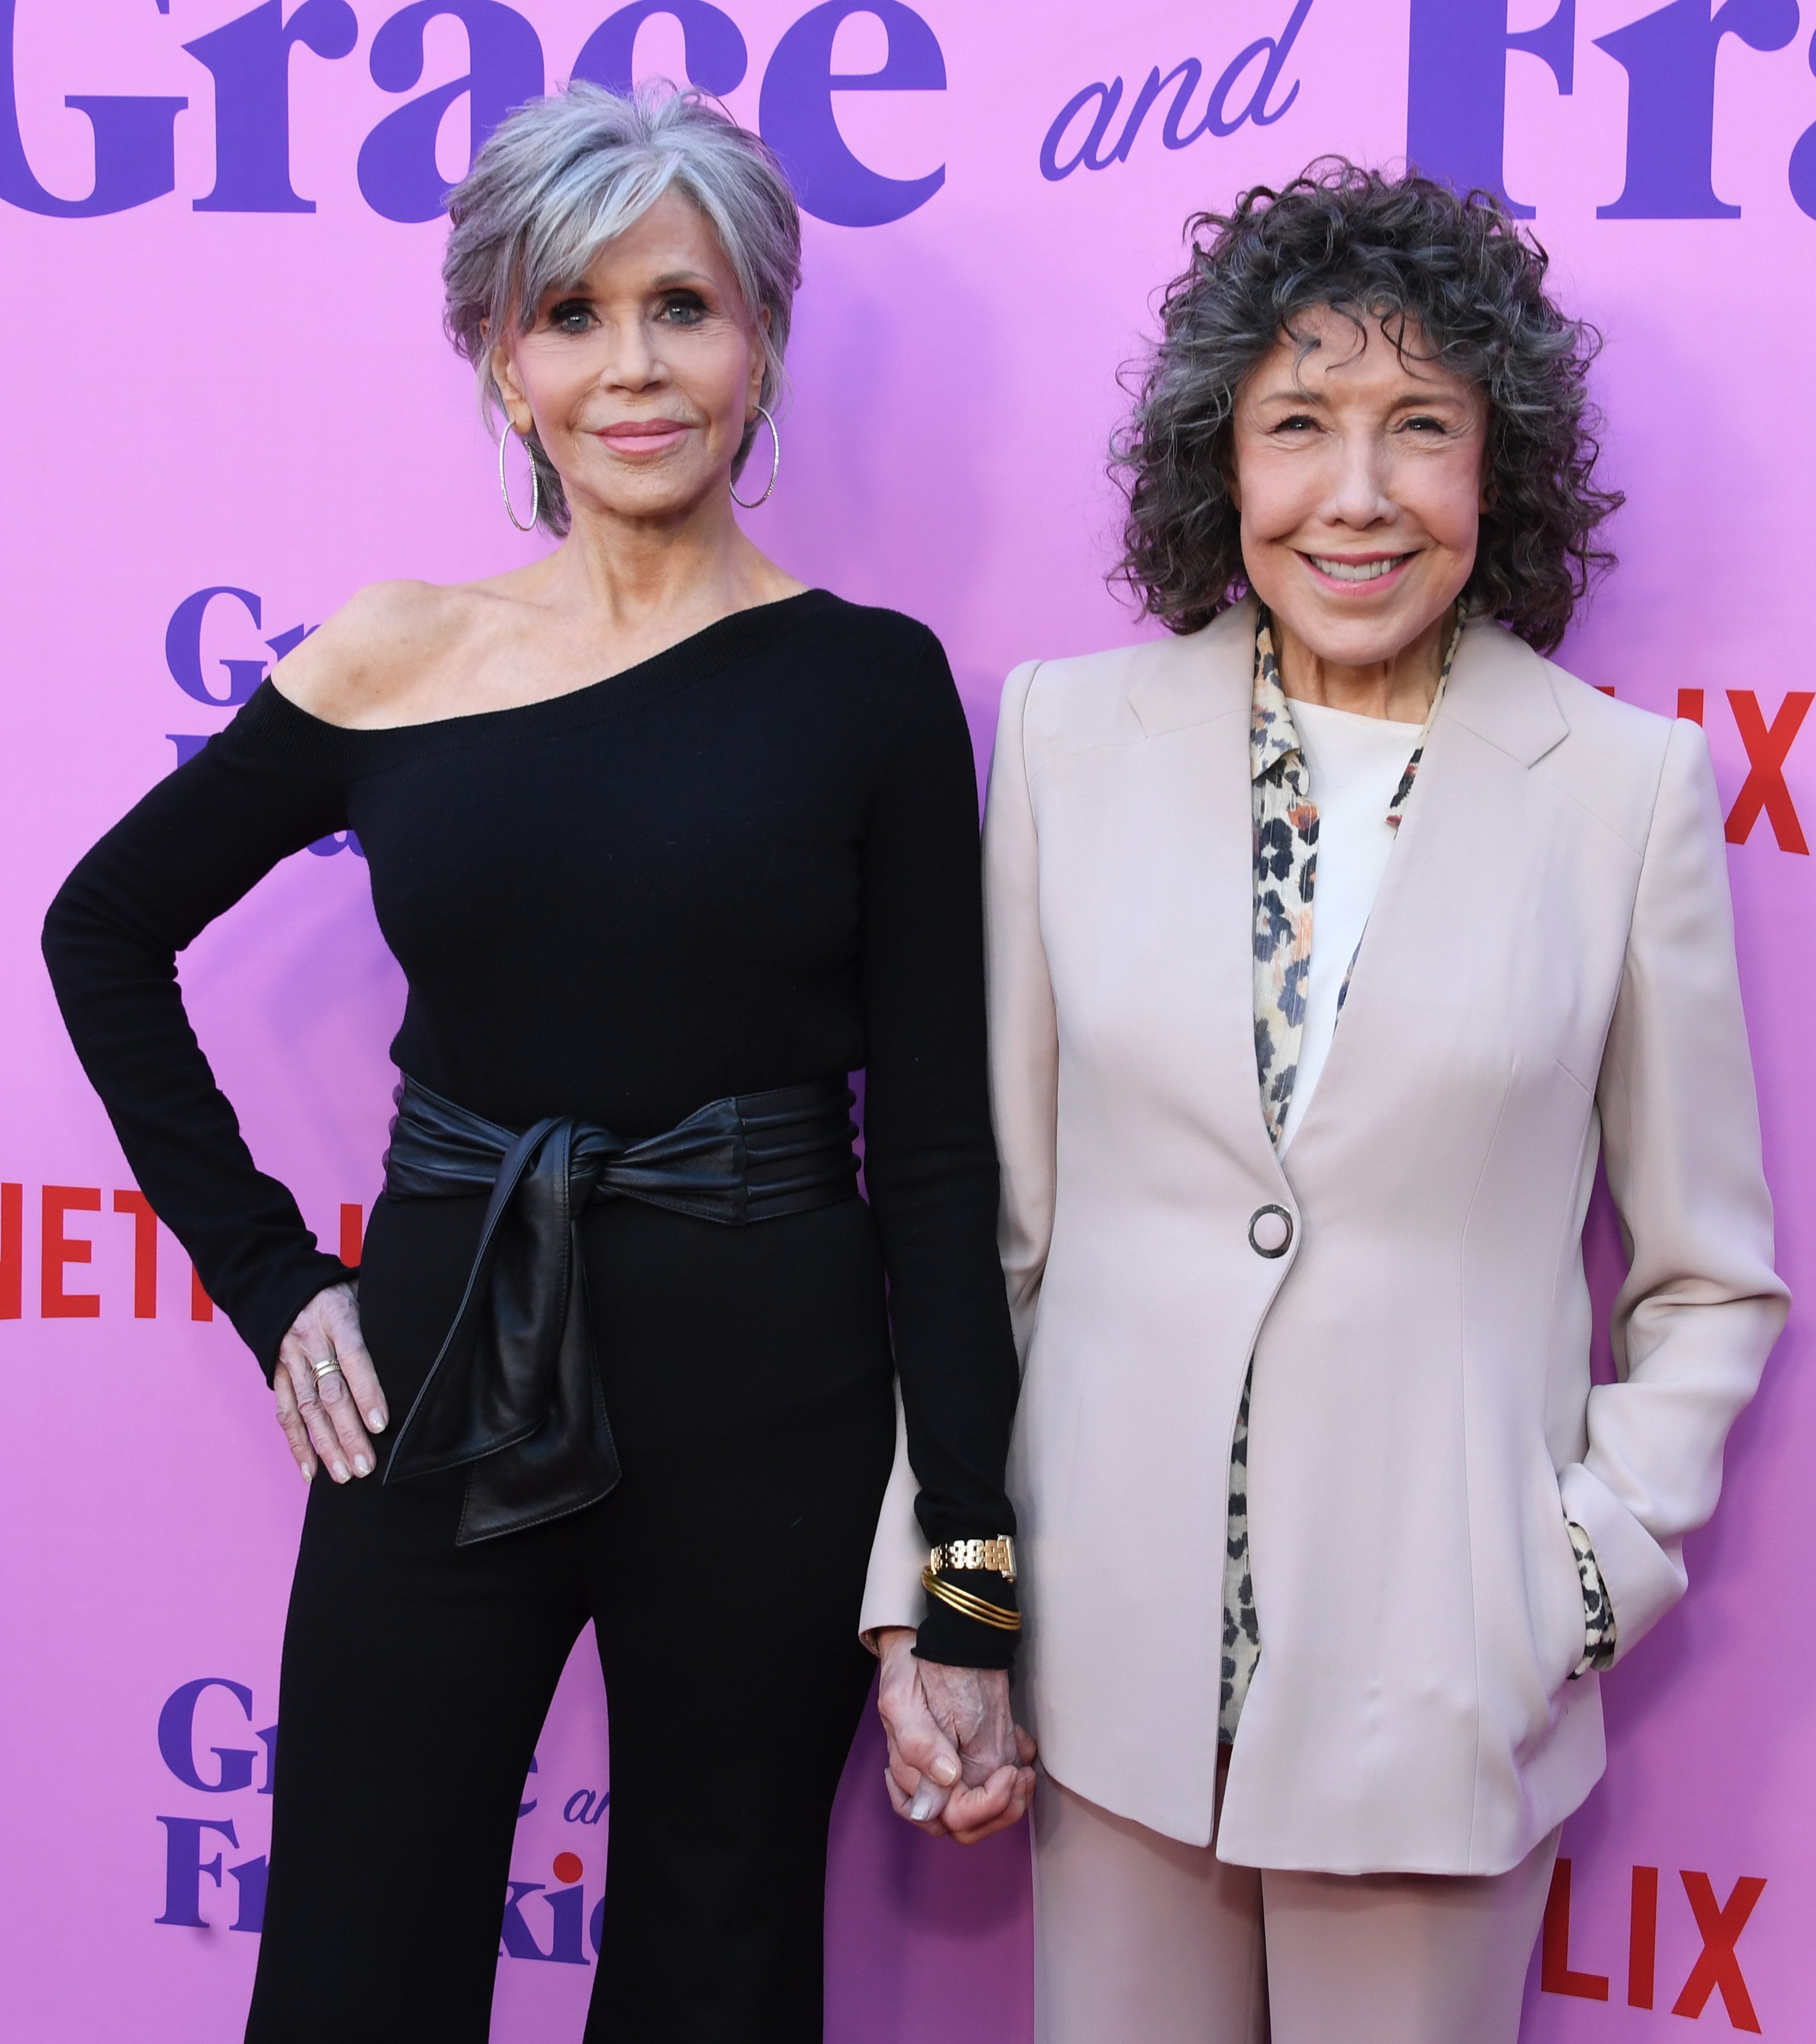 Jane Fonda and Lily Tomlin at the Los Angeles Special FYC Event For Netflix's "Grace And Frankie" on April 23, 2022, in Hollywood, California. | Source: Jon Kopaloff/Getty Images